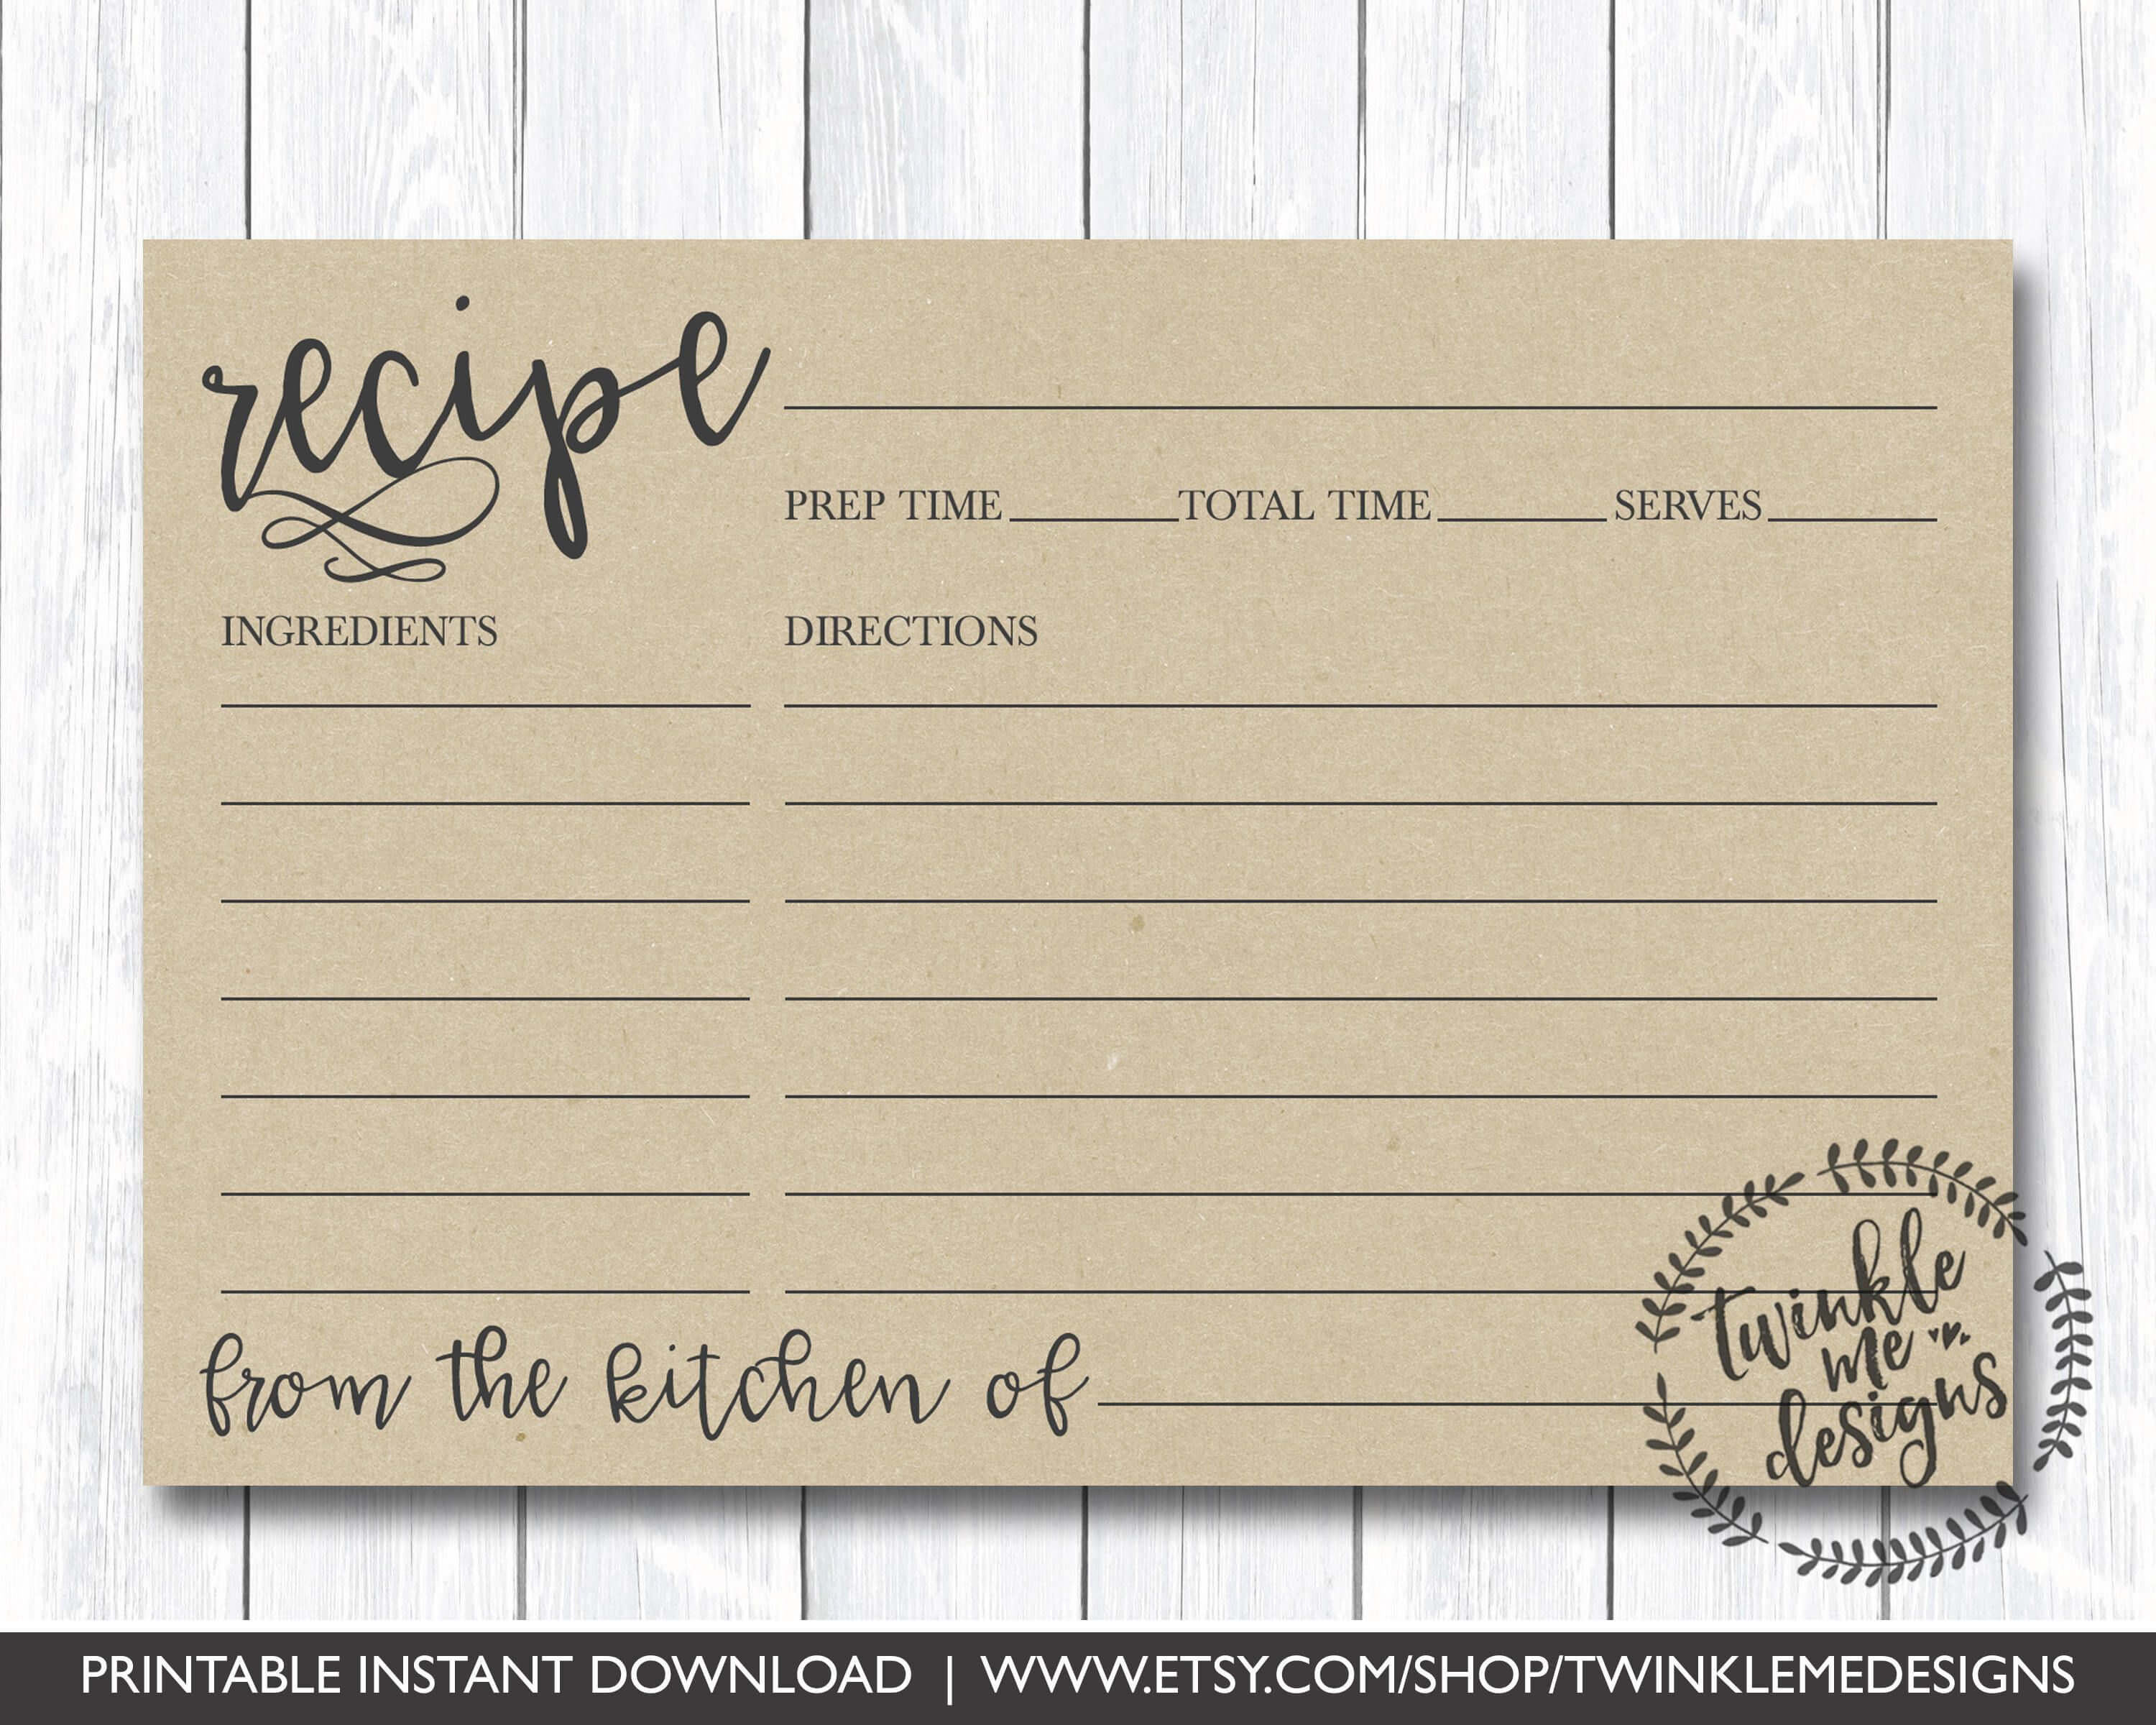 Recipe Card Printable, Printable Recipe Card, Diy Recipe Intended For 4X6 Photo Card Template Free